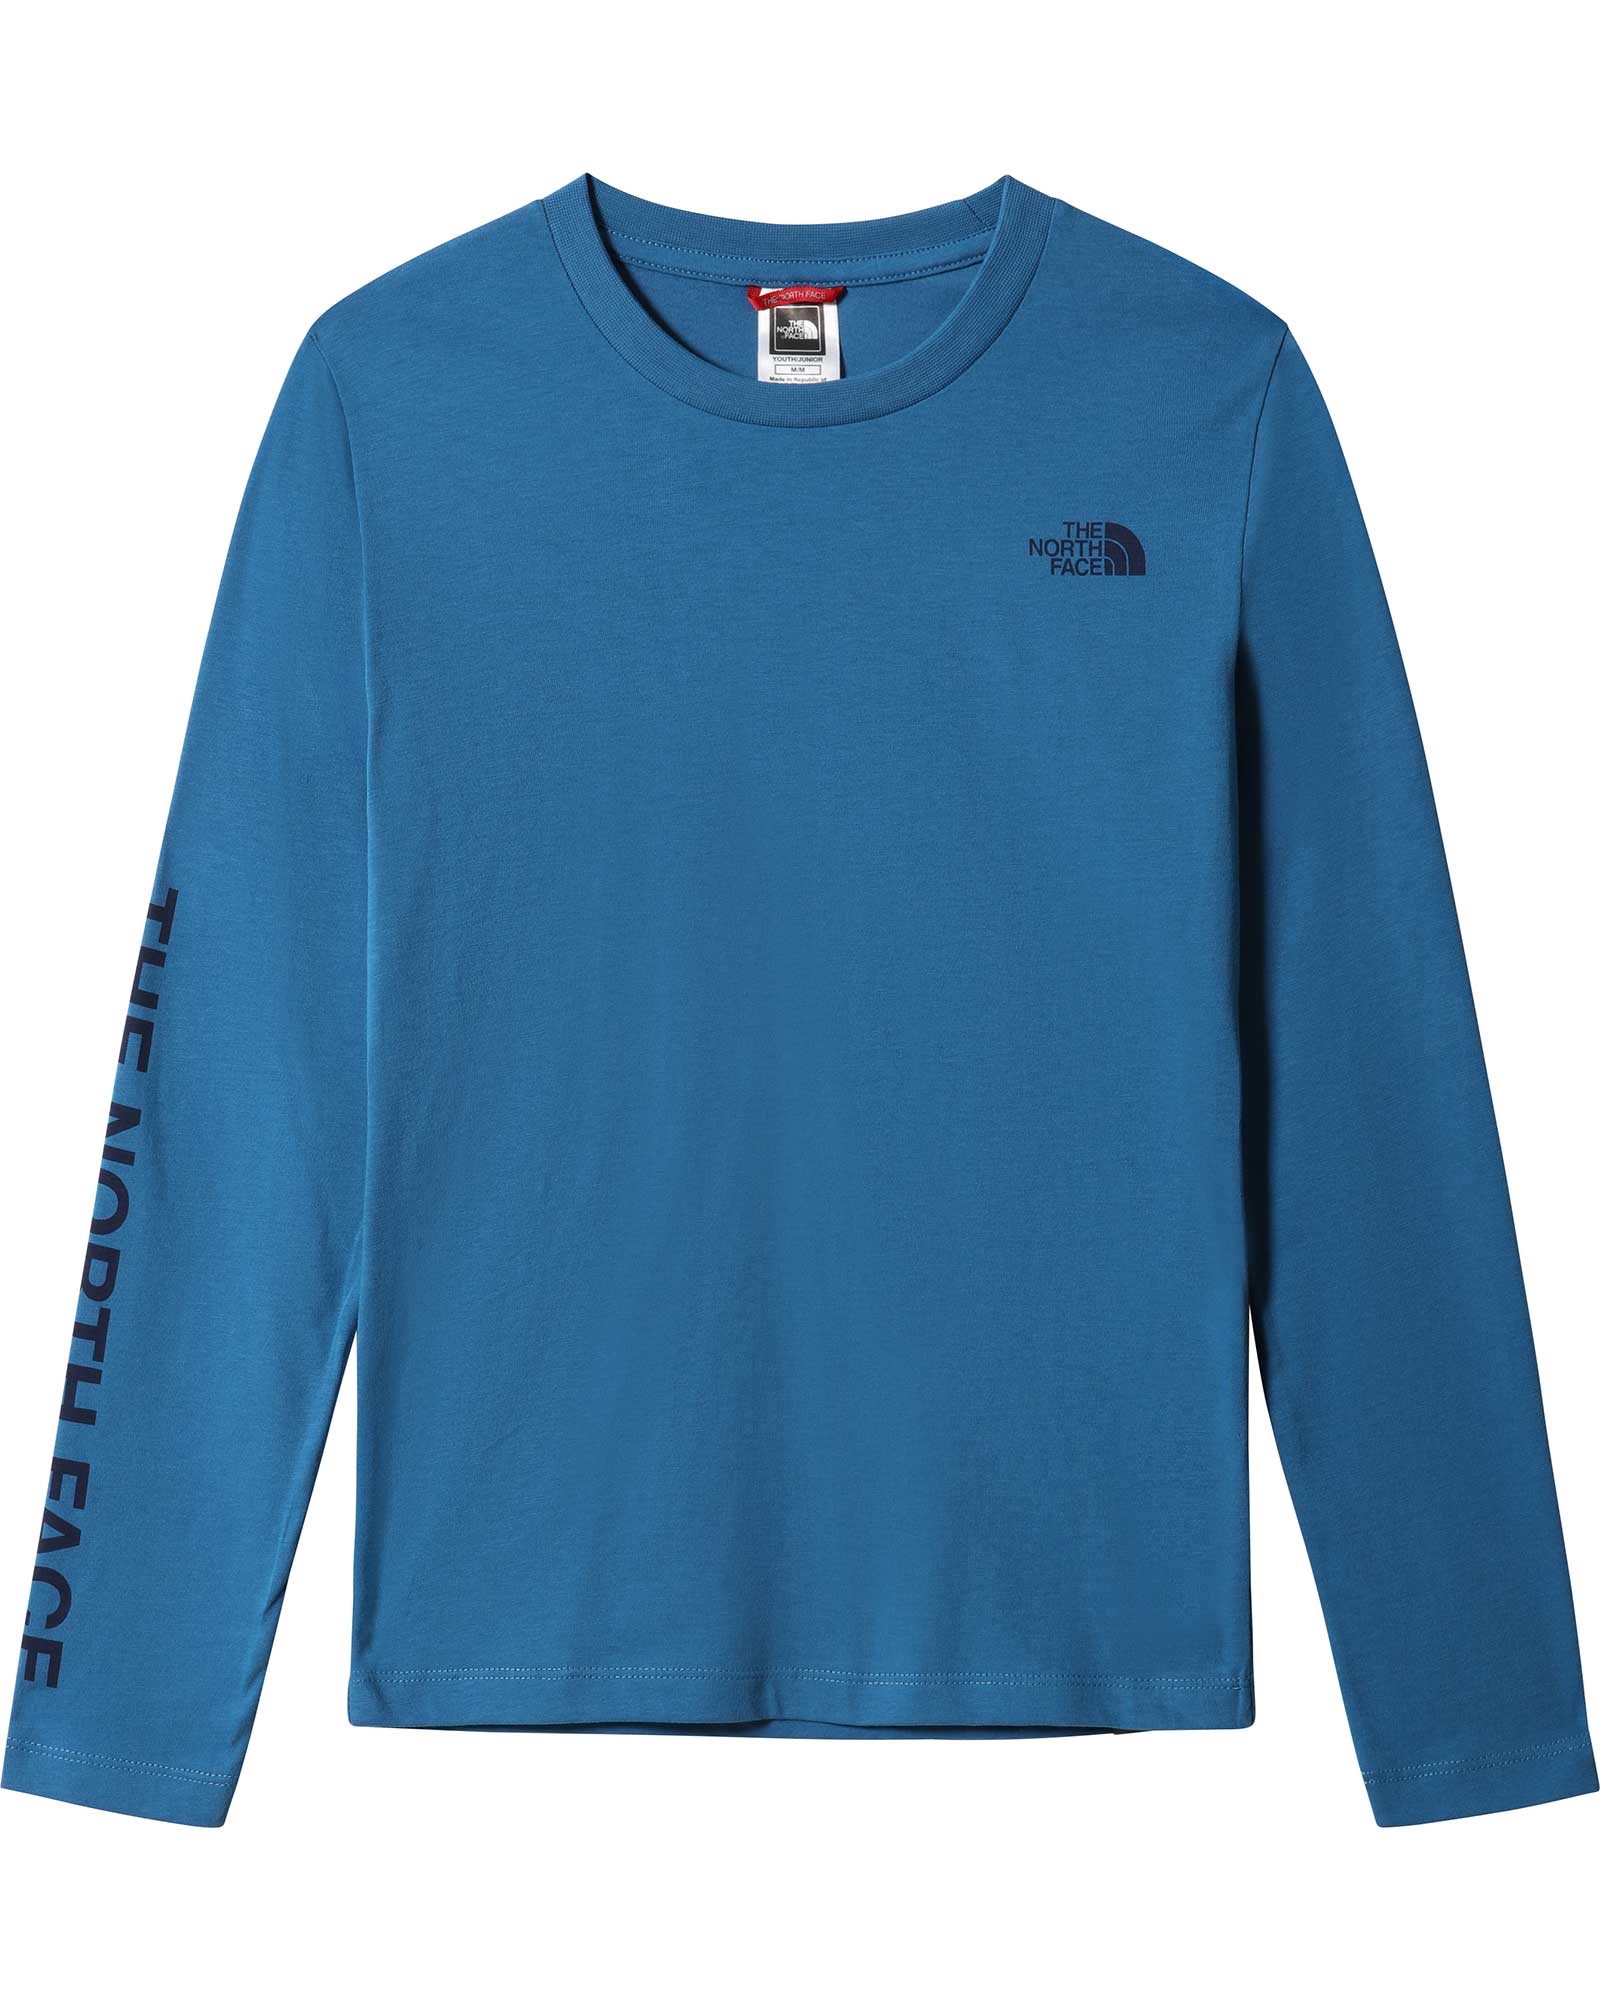 The North Face Youth Youth Long Sleeve Simple Dome Kids’ T Shirt - Banff Blue M